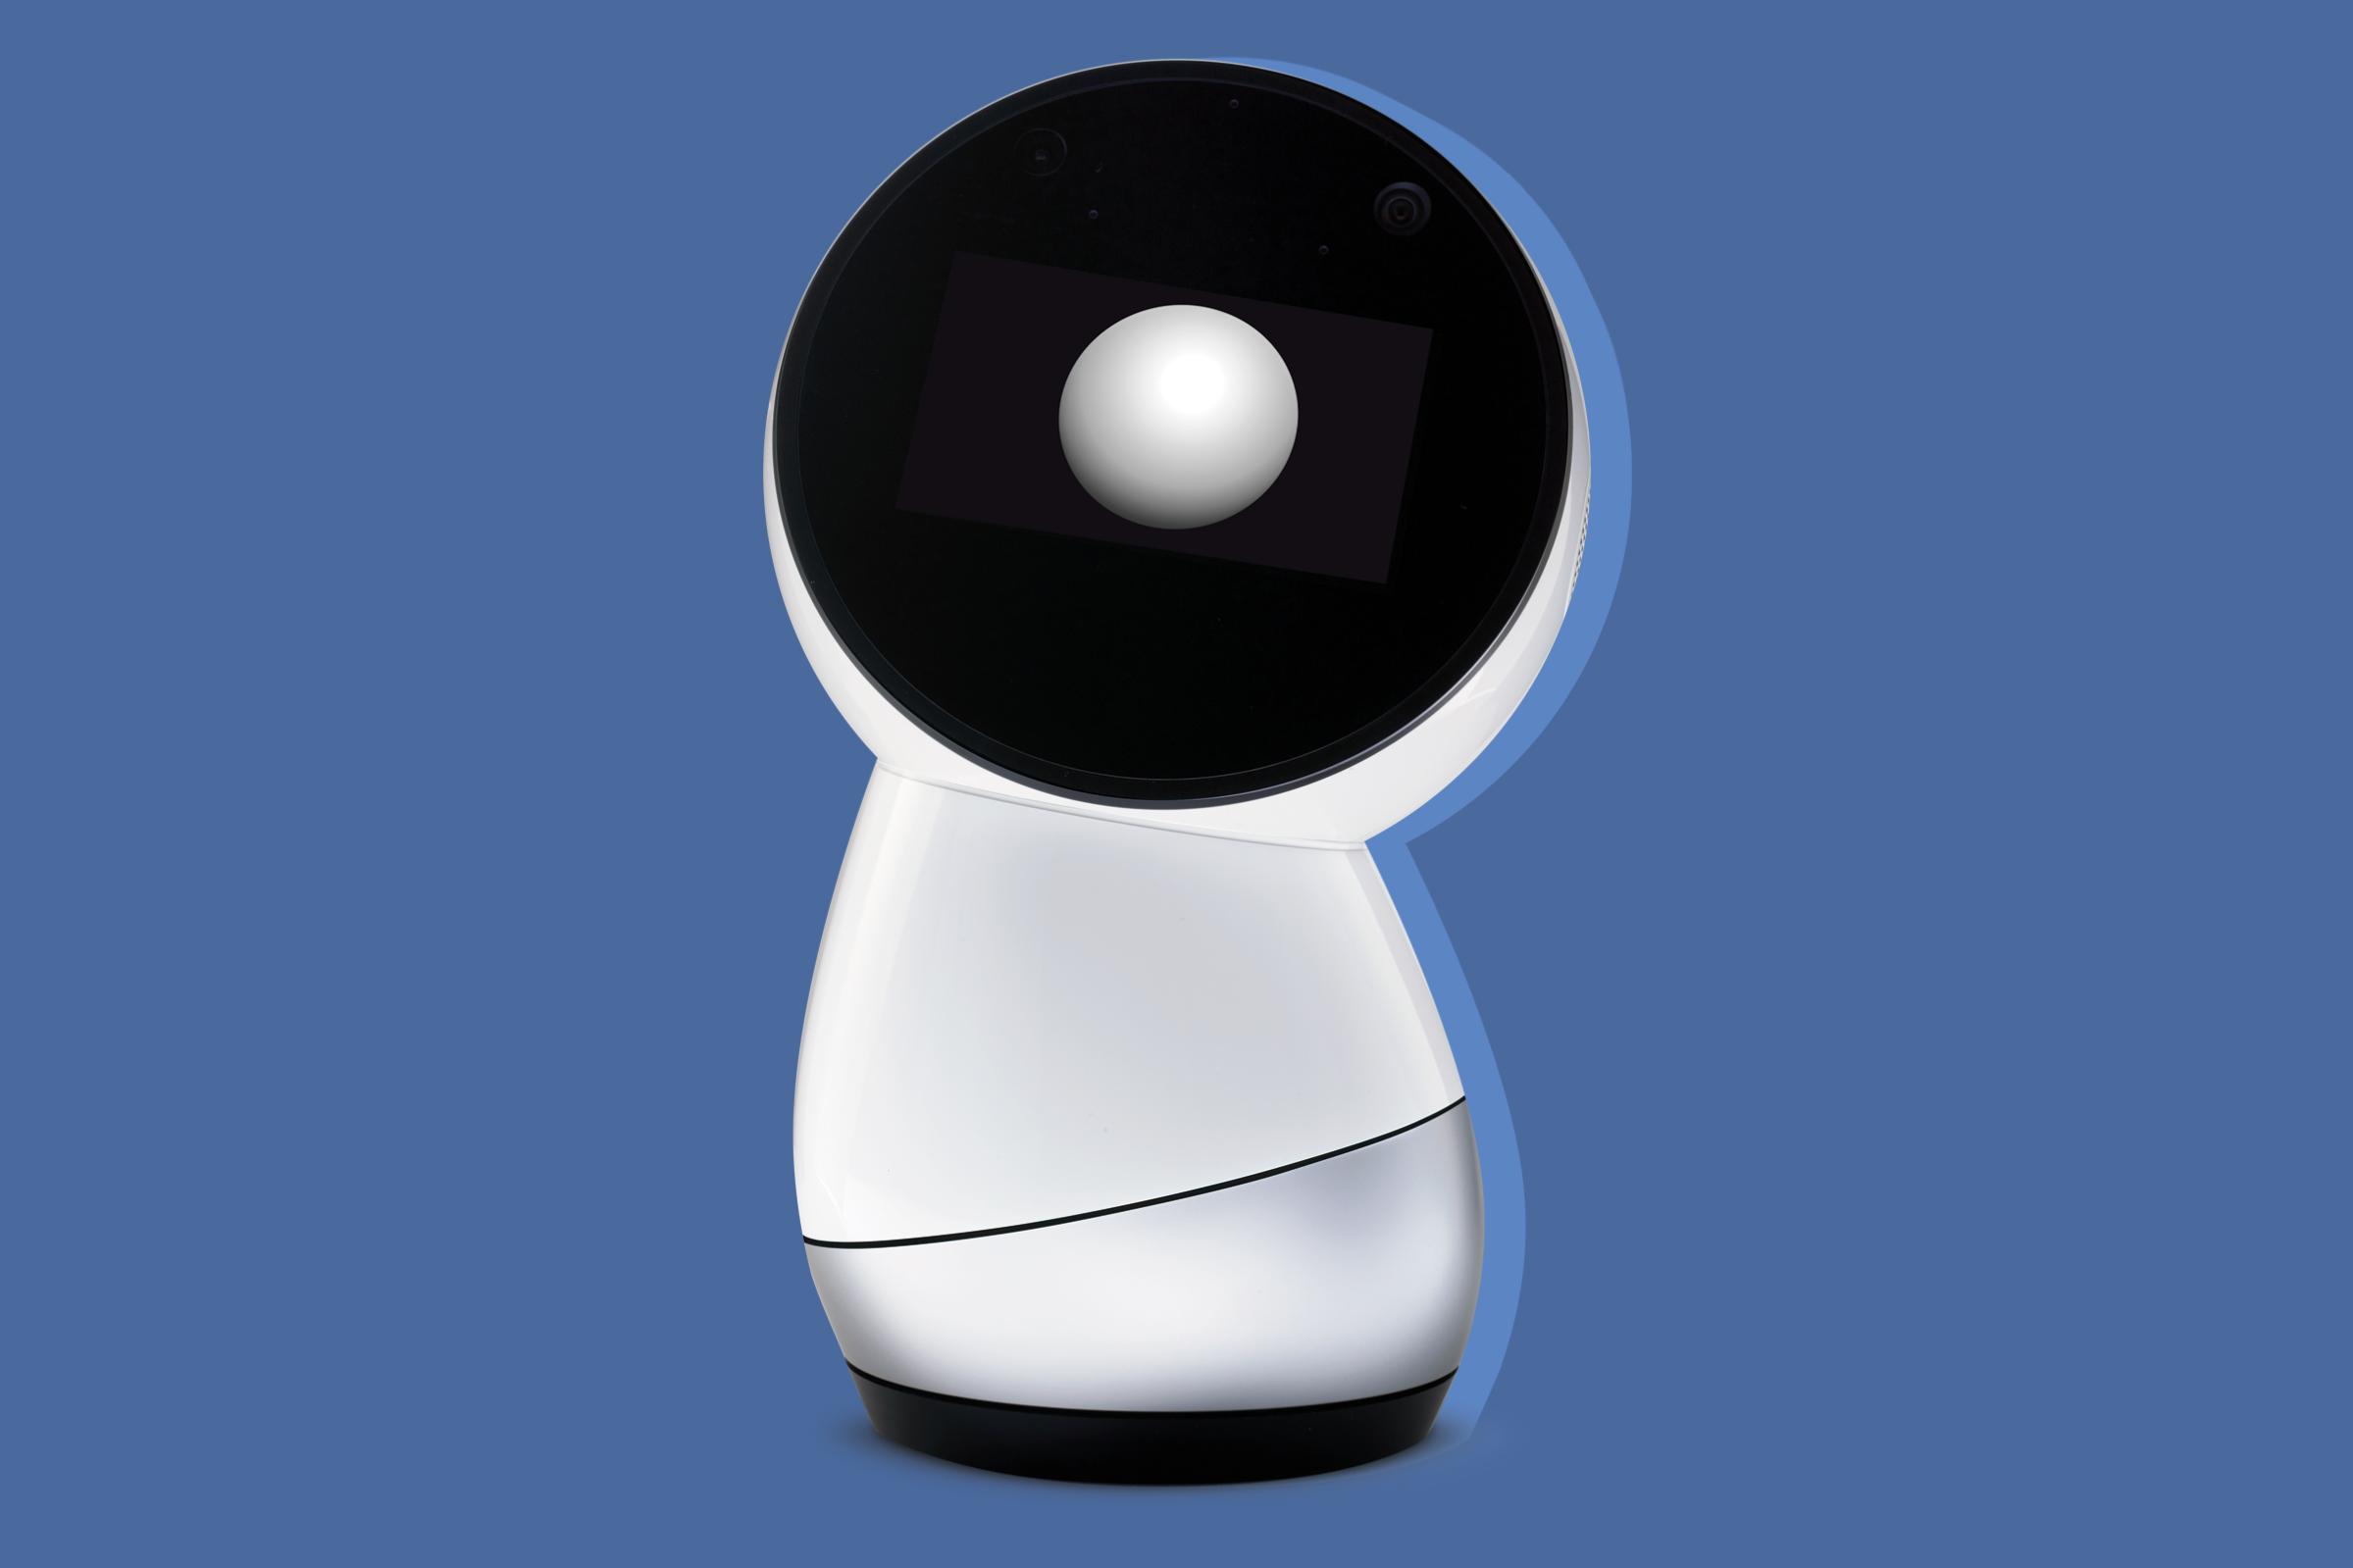 Jibo is one of the best inventions of 2017